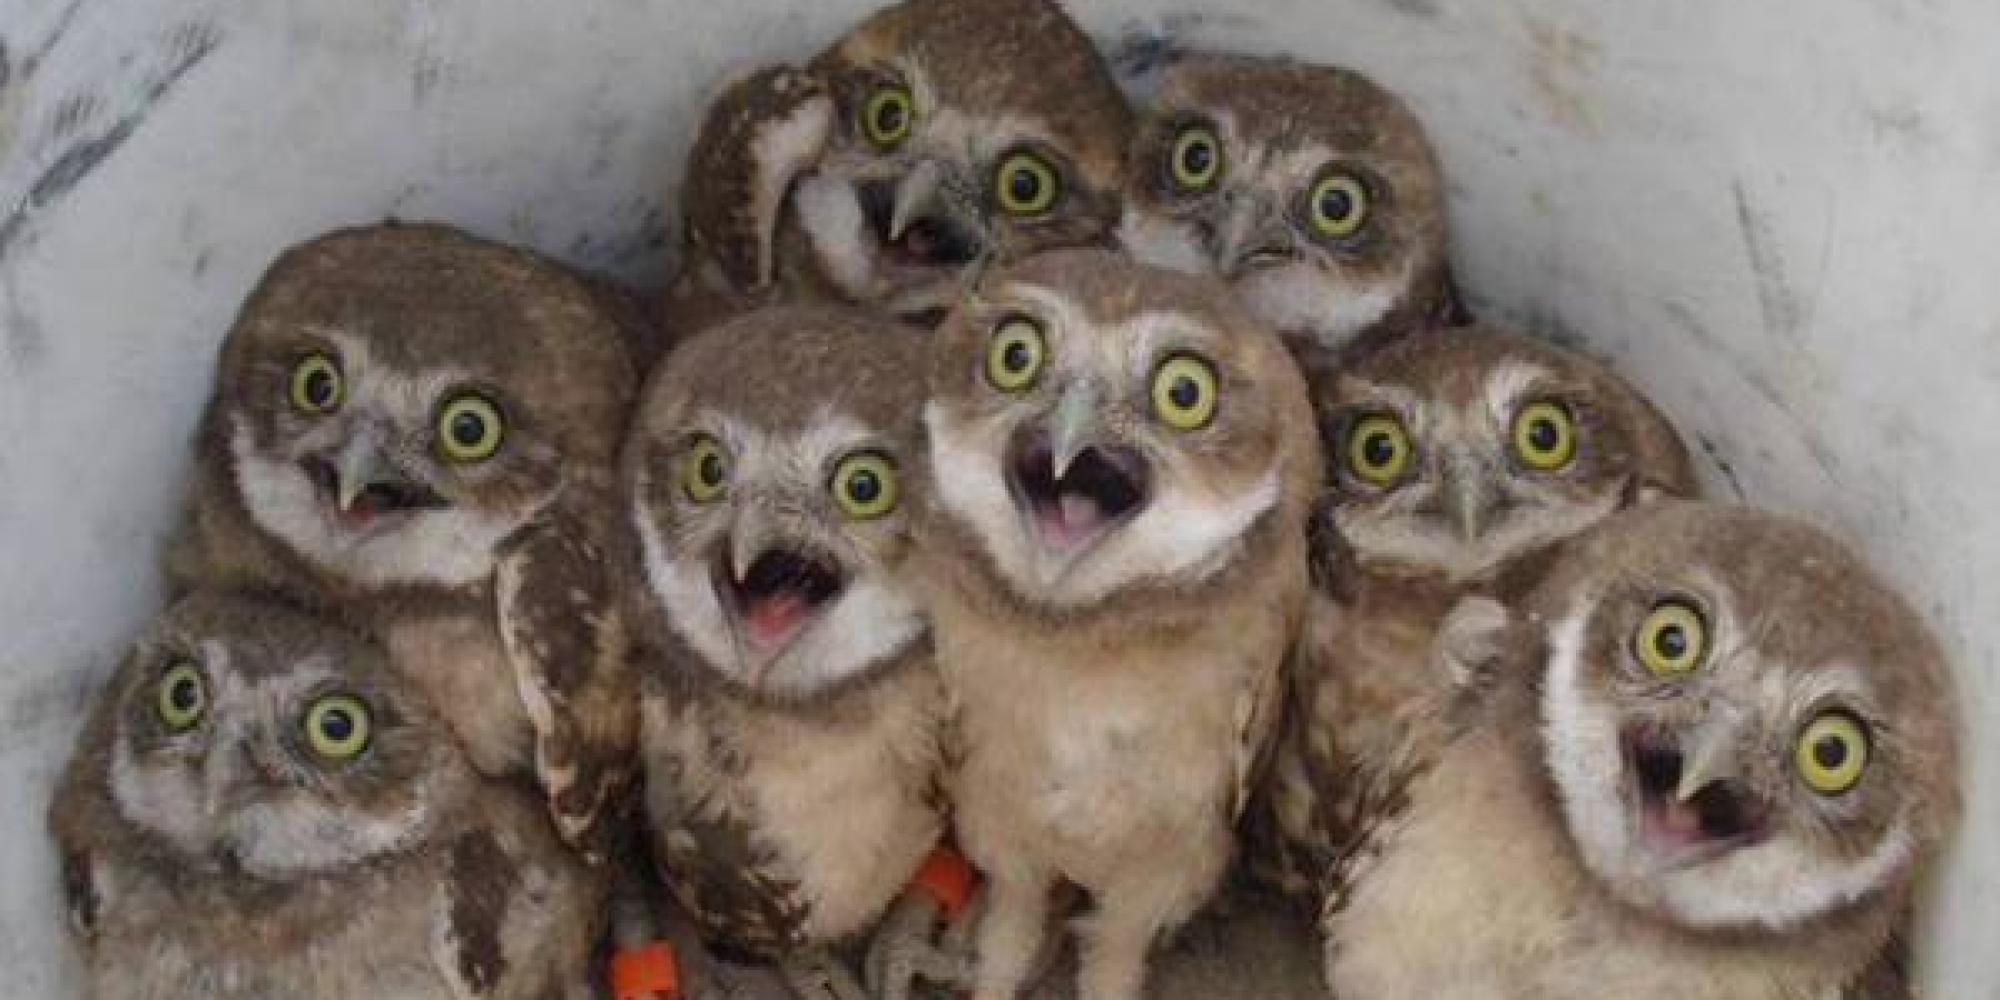 whooo-could-resist-these-owls-huffpost